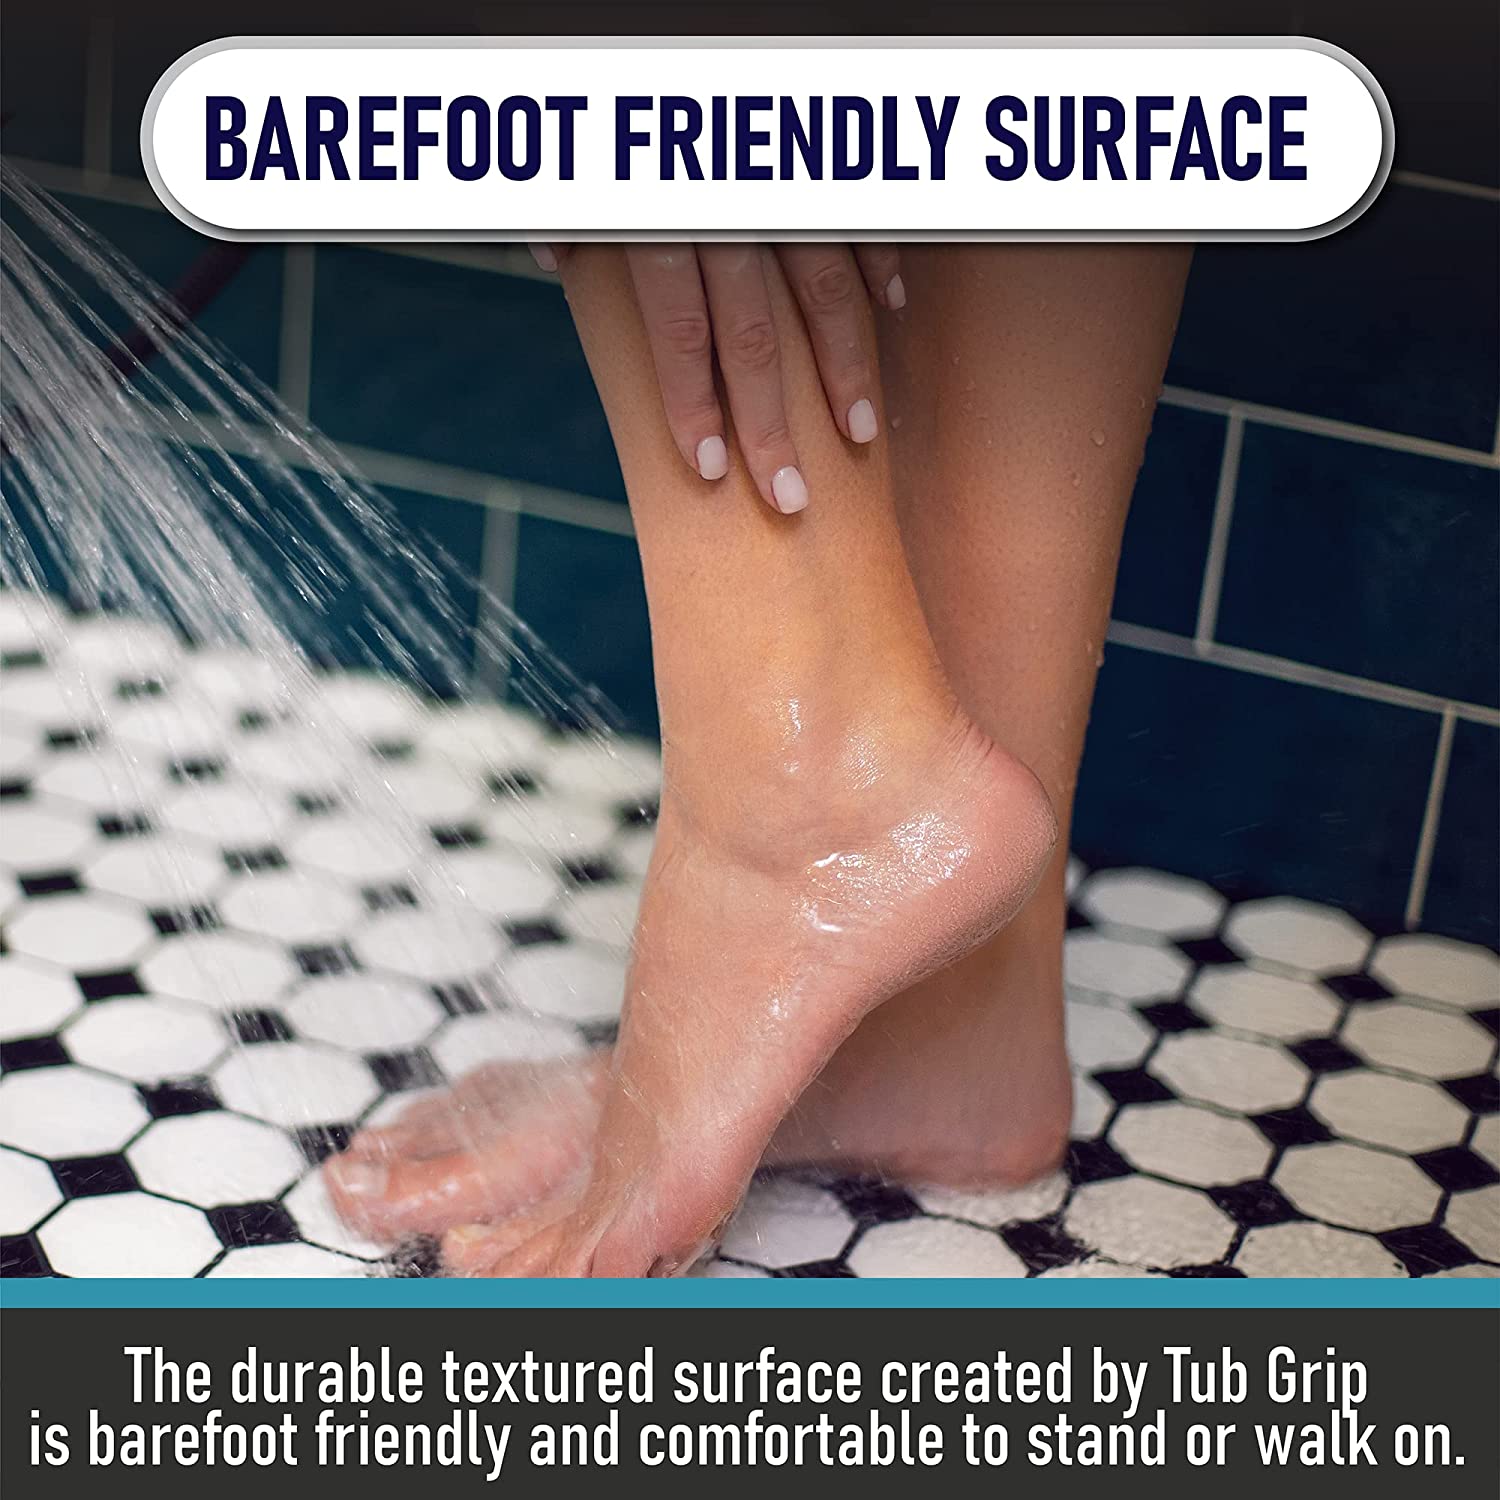 Apply Tub Grip Non-Slip Coating Easily for Maximum Protection